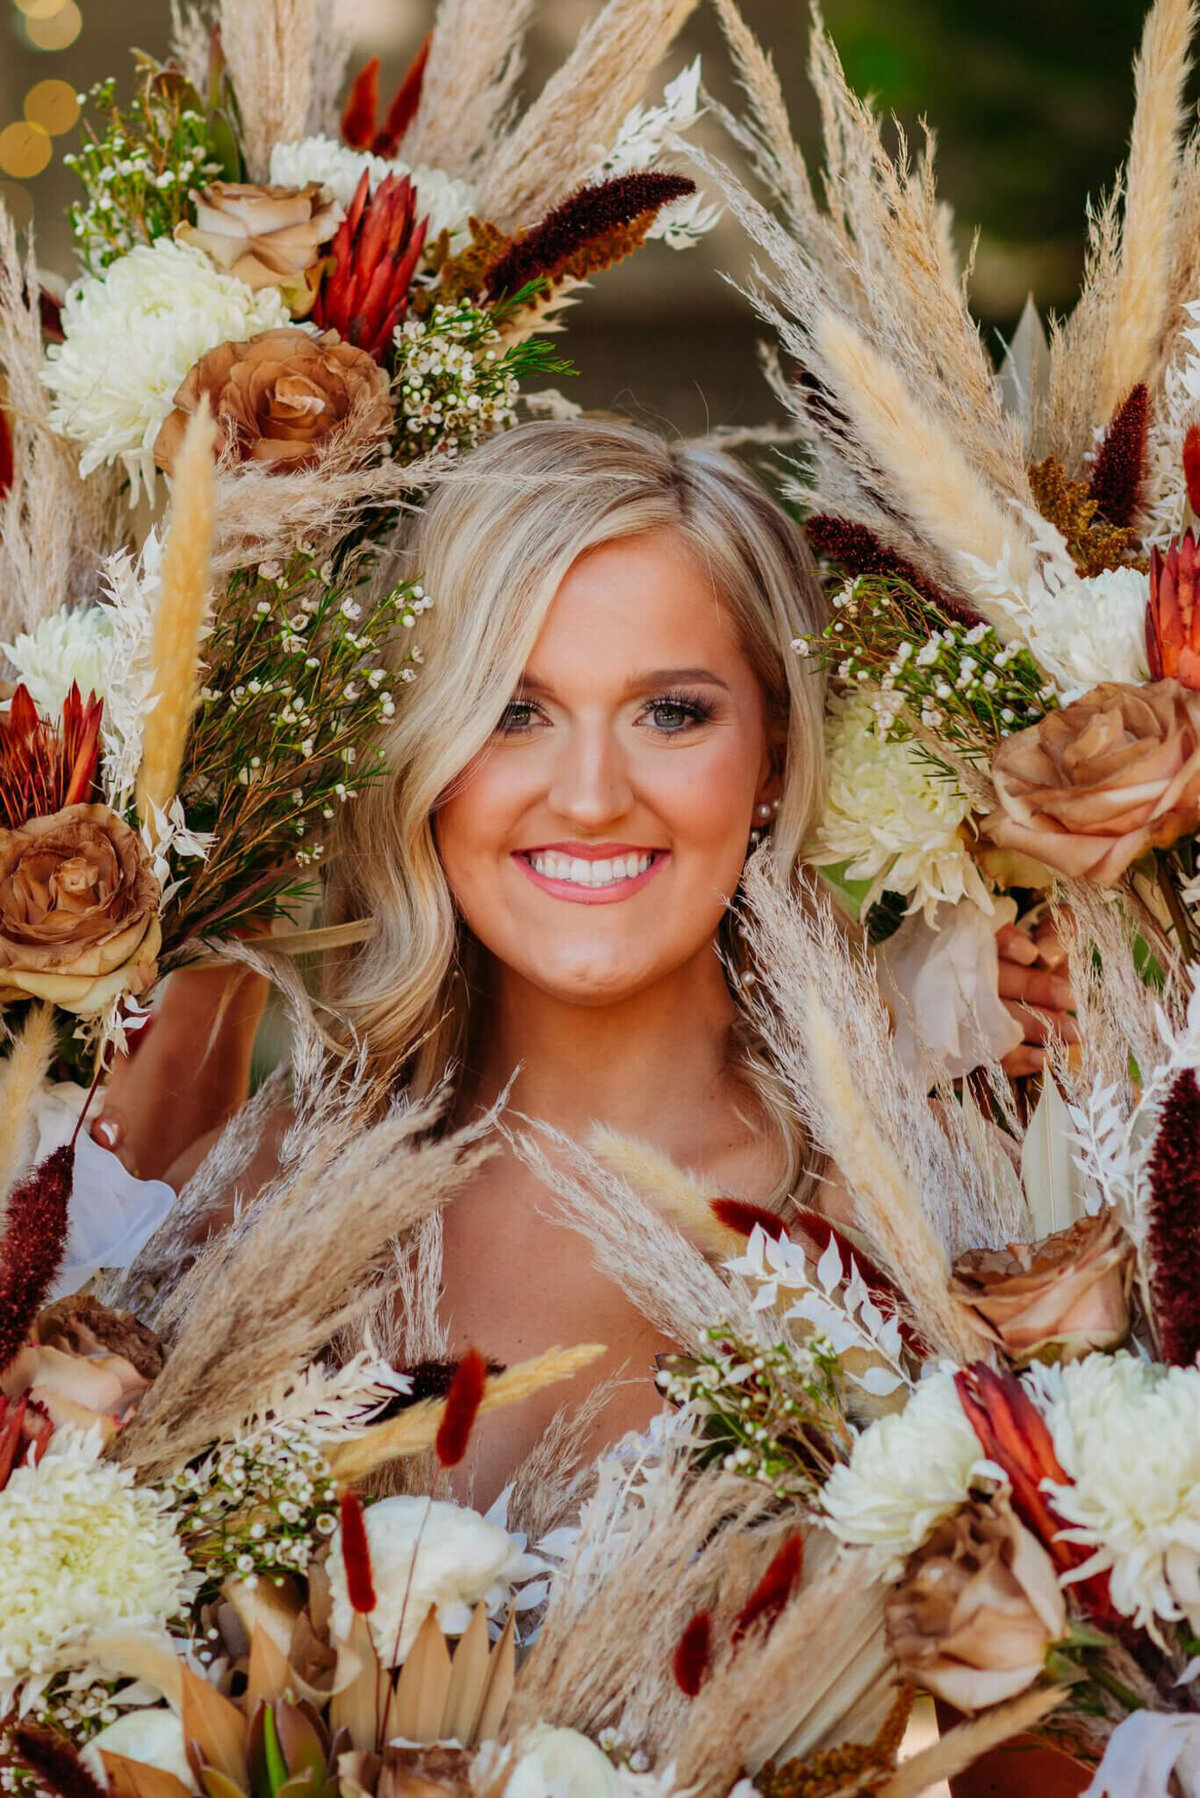 Photo of a bride smiling as she is surrounded by flowers